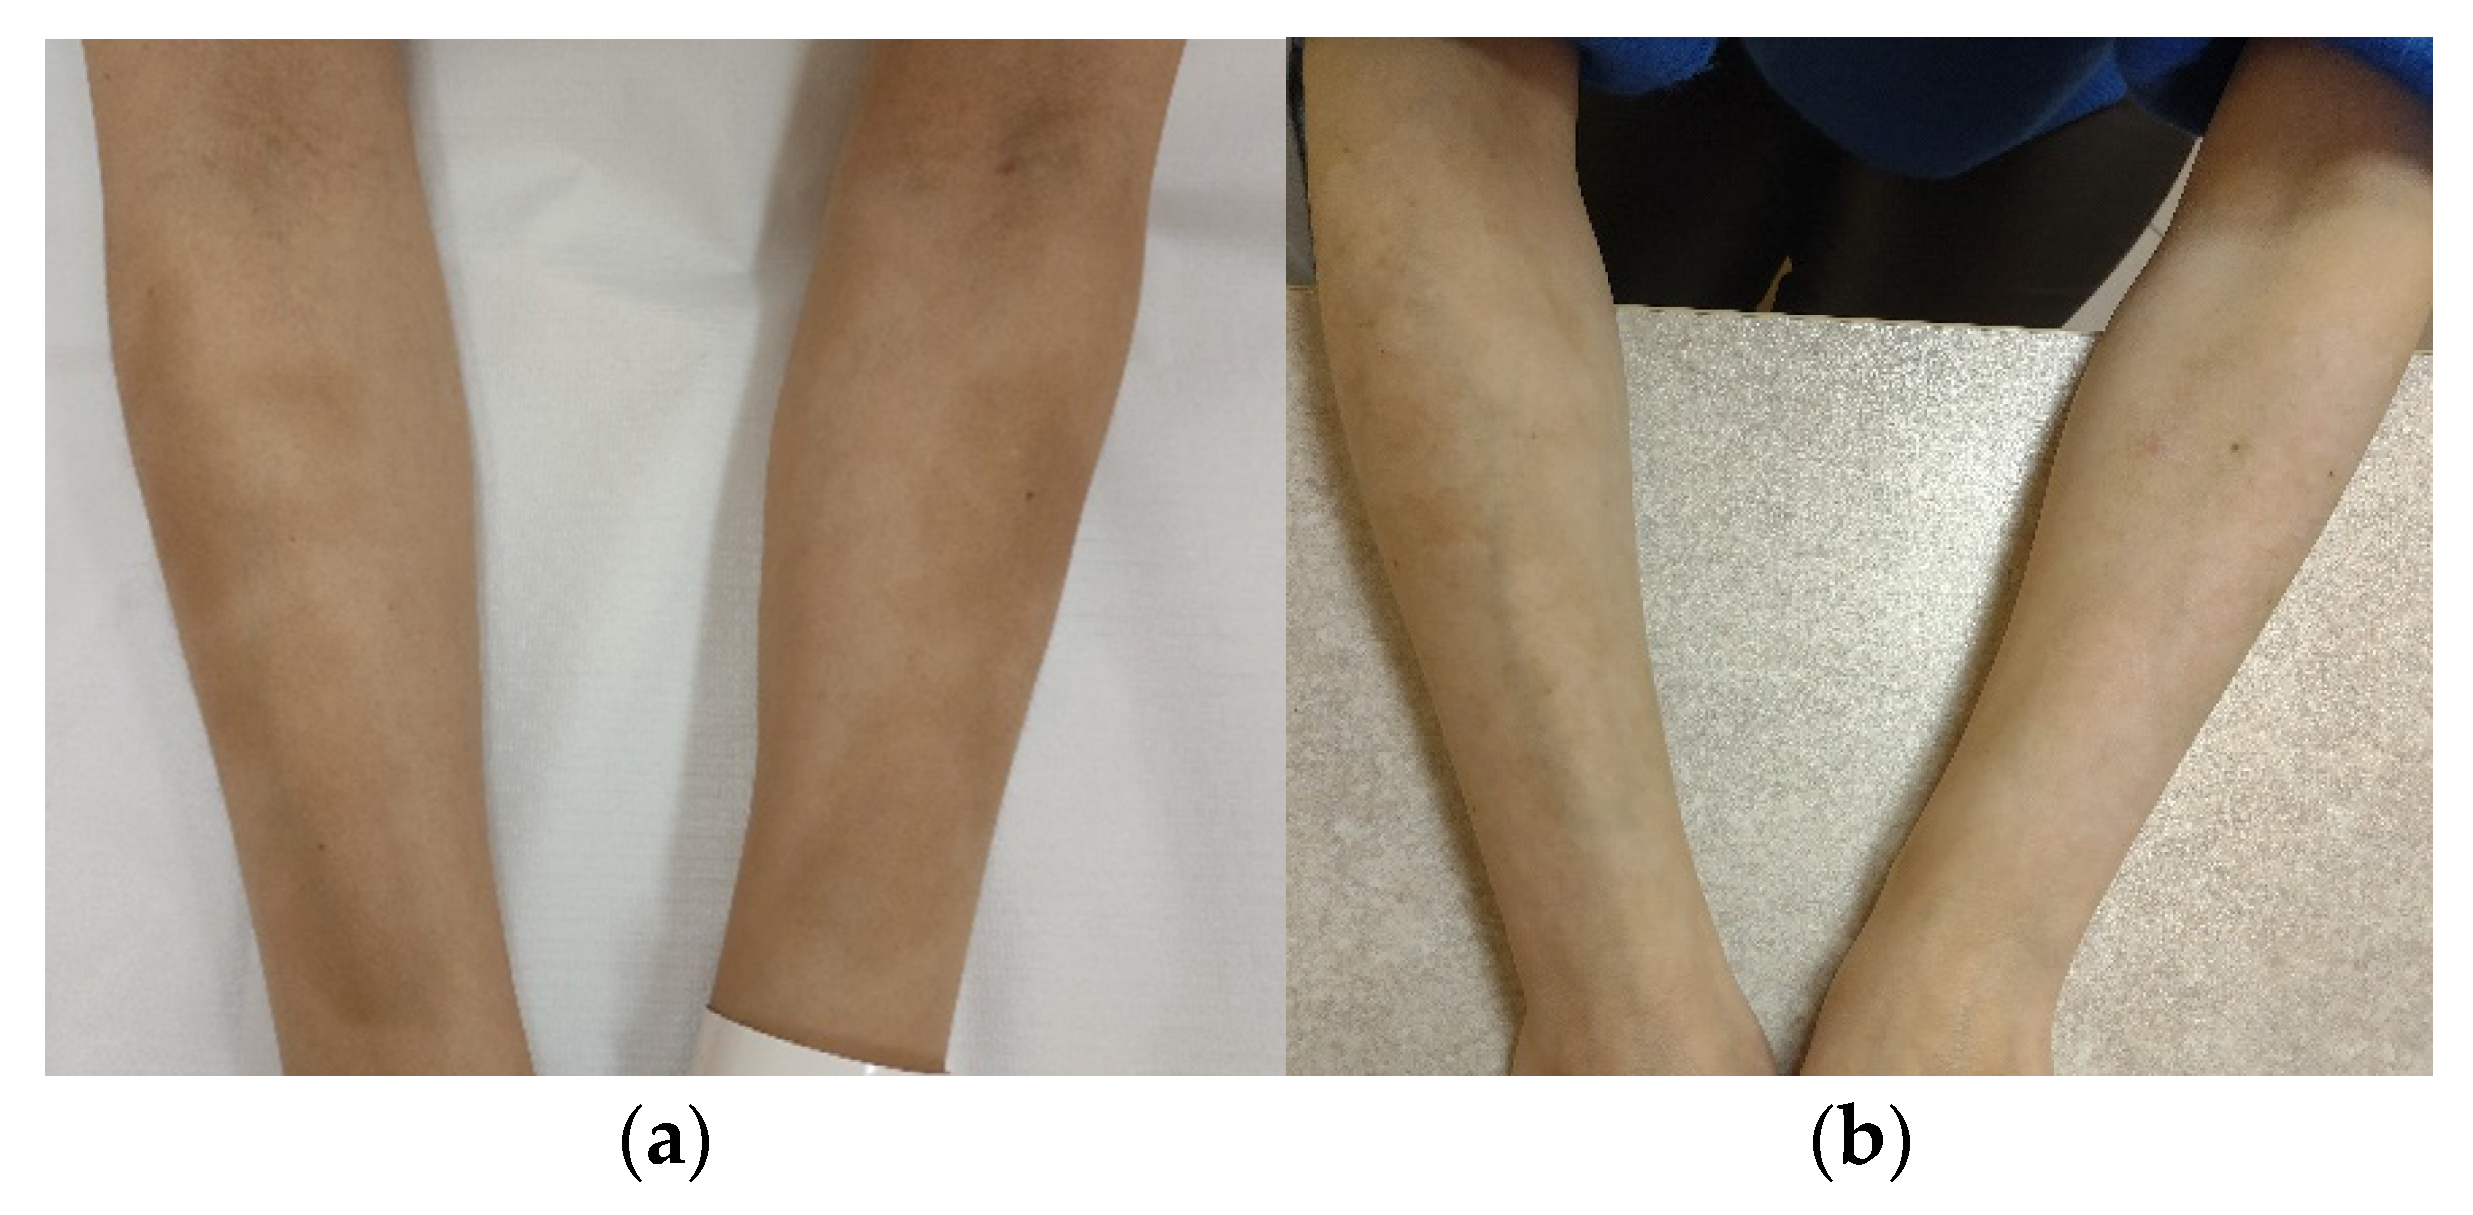 IJERPH | Free Full-Text | Fractional Ablative Carbon Dioxide Lasers for the  Treatment of Morphea: A Case Series and Literature Review